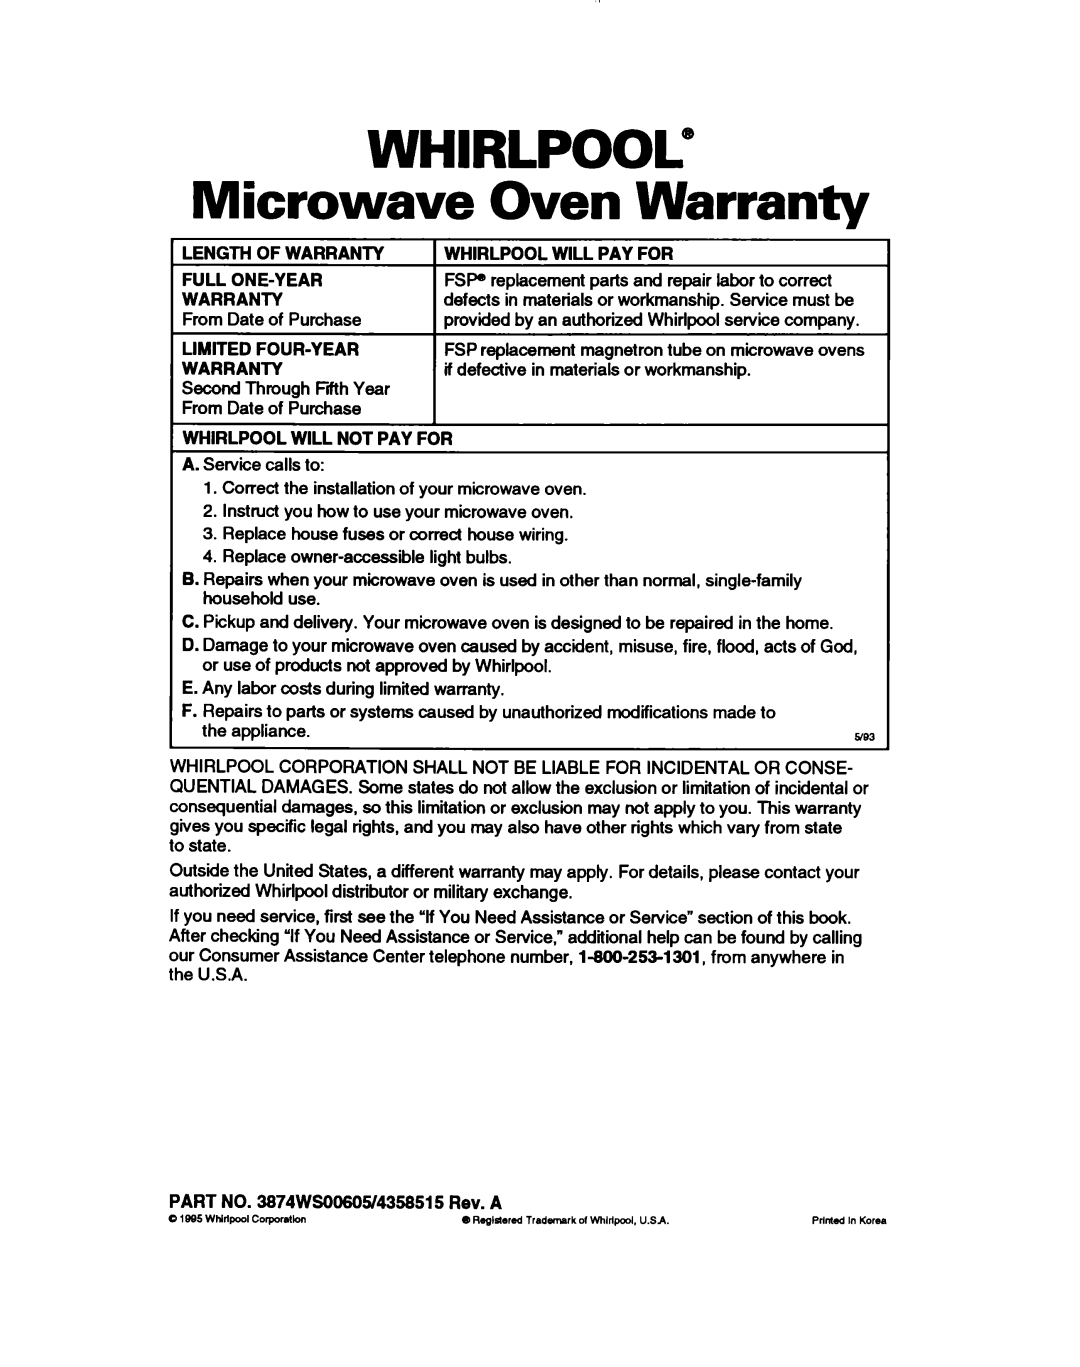 Whirlpool MH7115XB warranty WHIRLPOOL” Microwave Oven Warranty, Length Of Warranm, Whirlpool Will Pay For, Full One-Year 